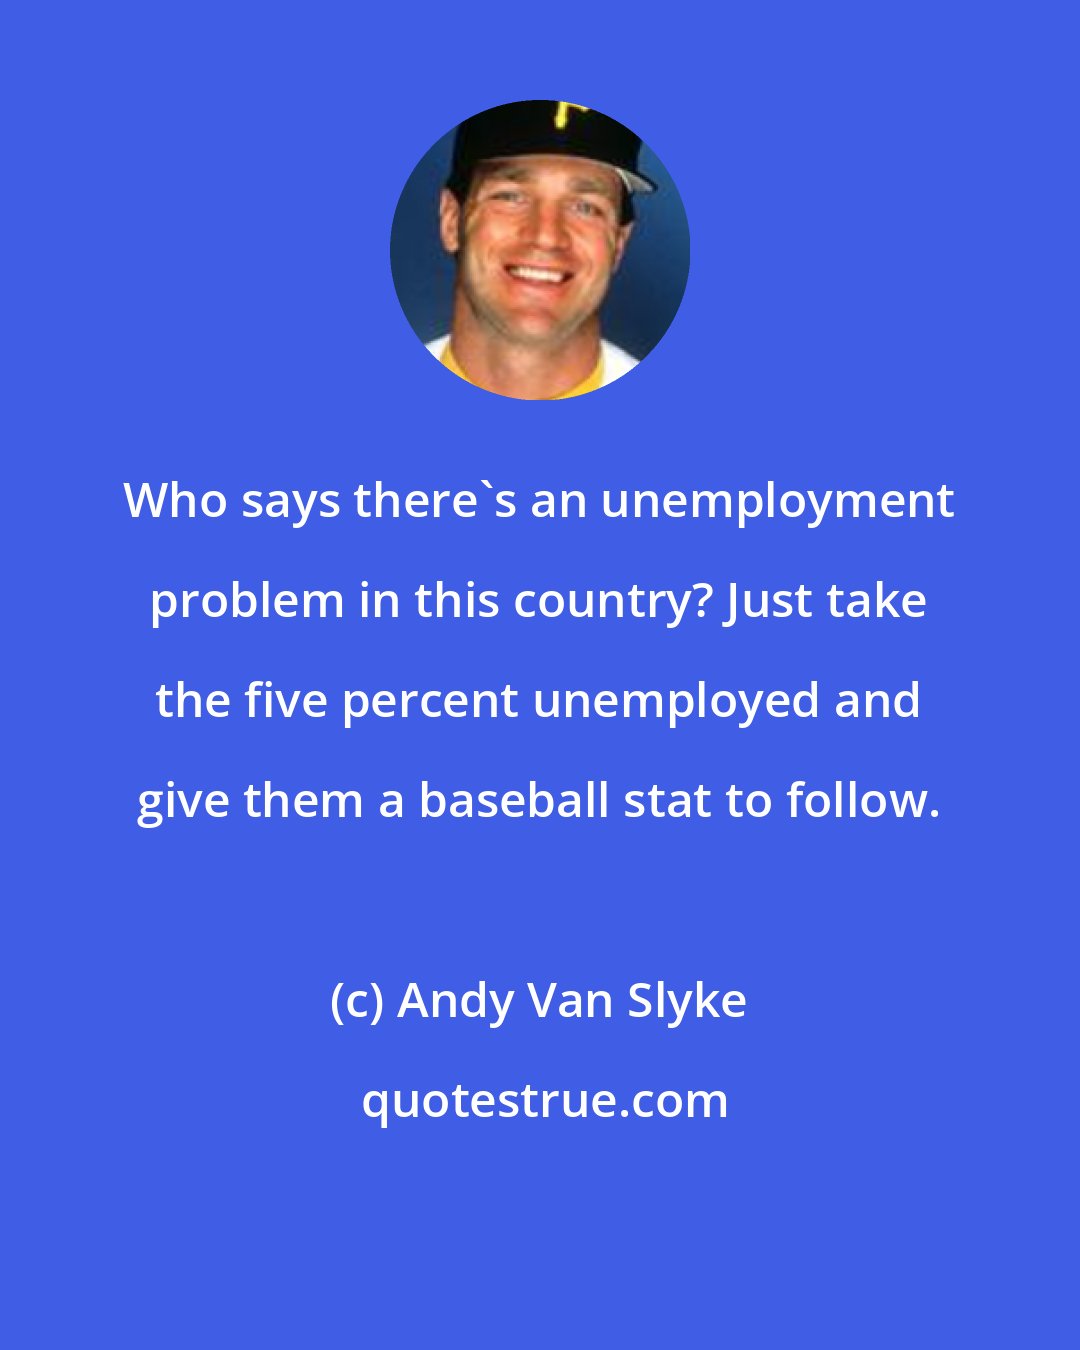 Andy Van Slyke: Who says there's an unemployment problem in this country? Just take the five percent unemployed and give them a baseball stat to follow.